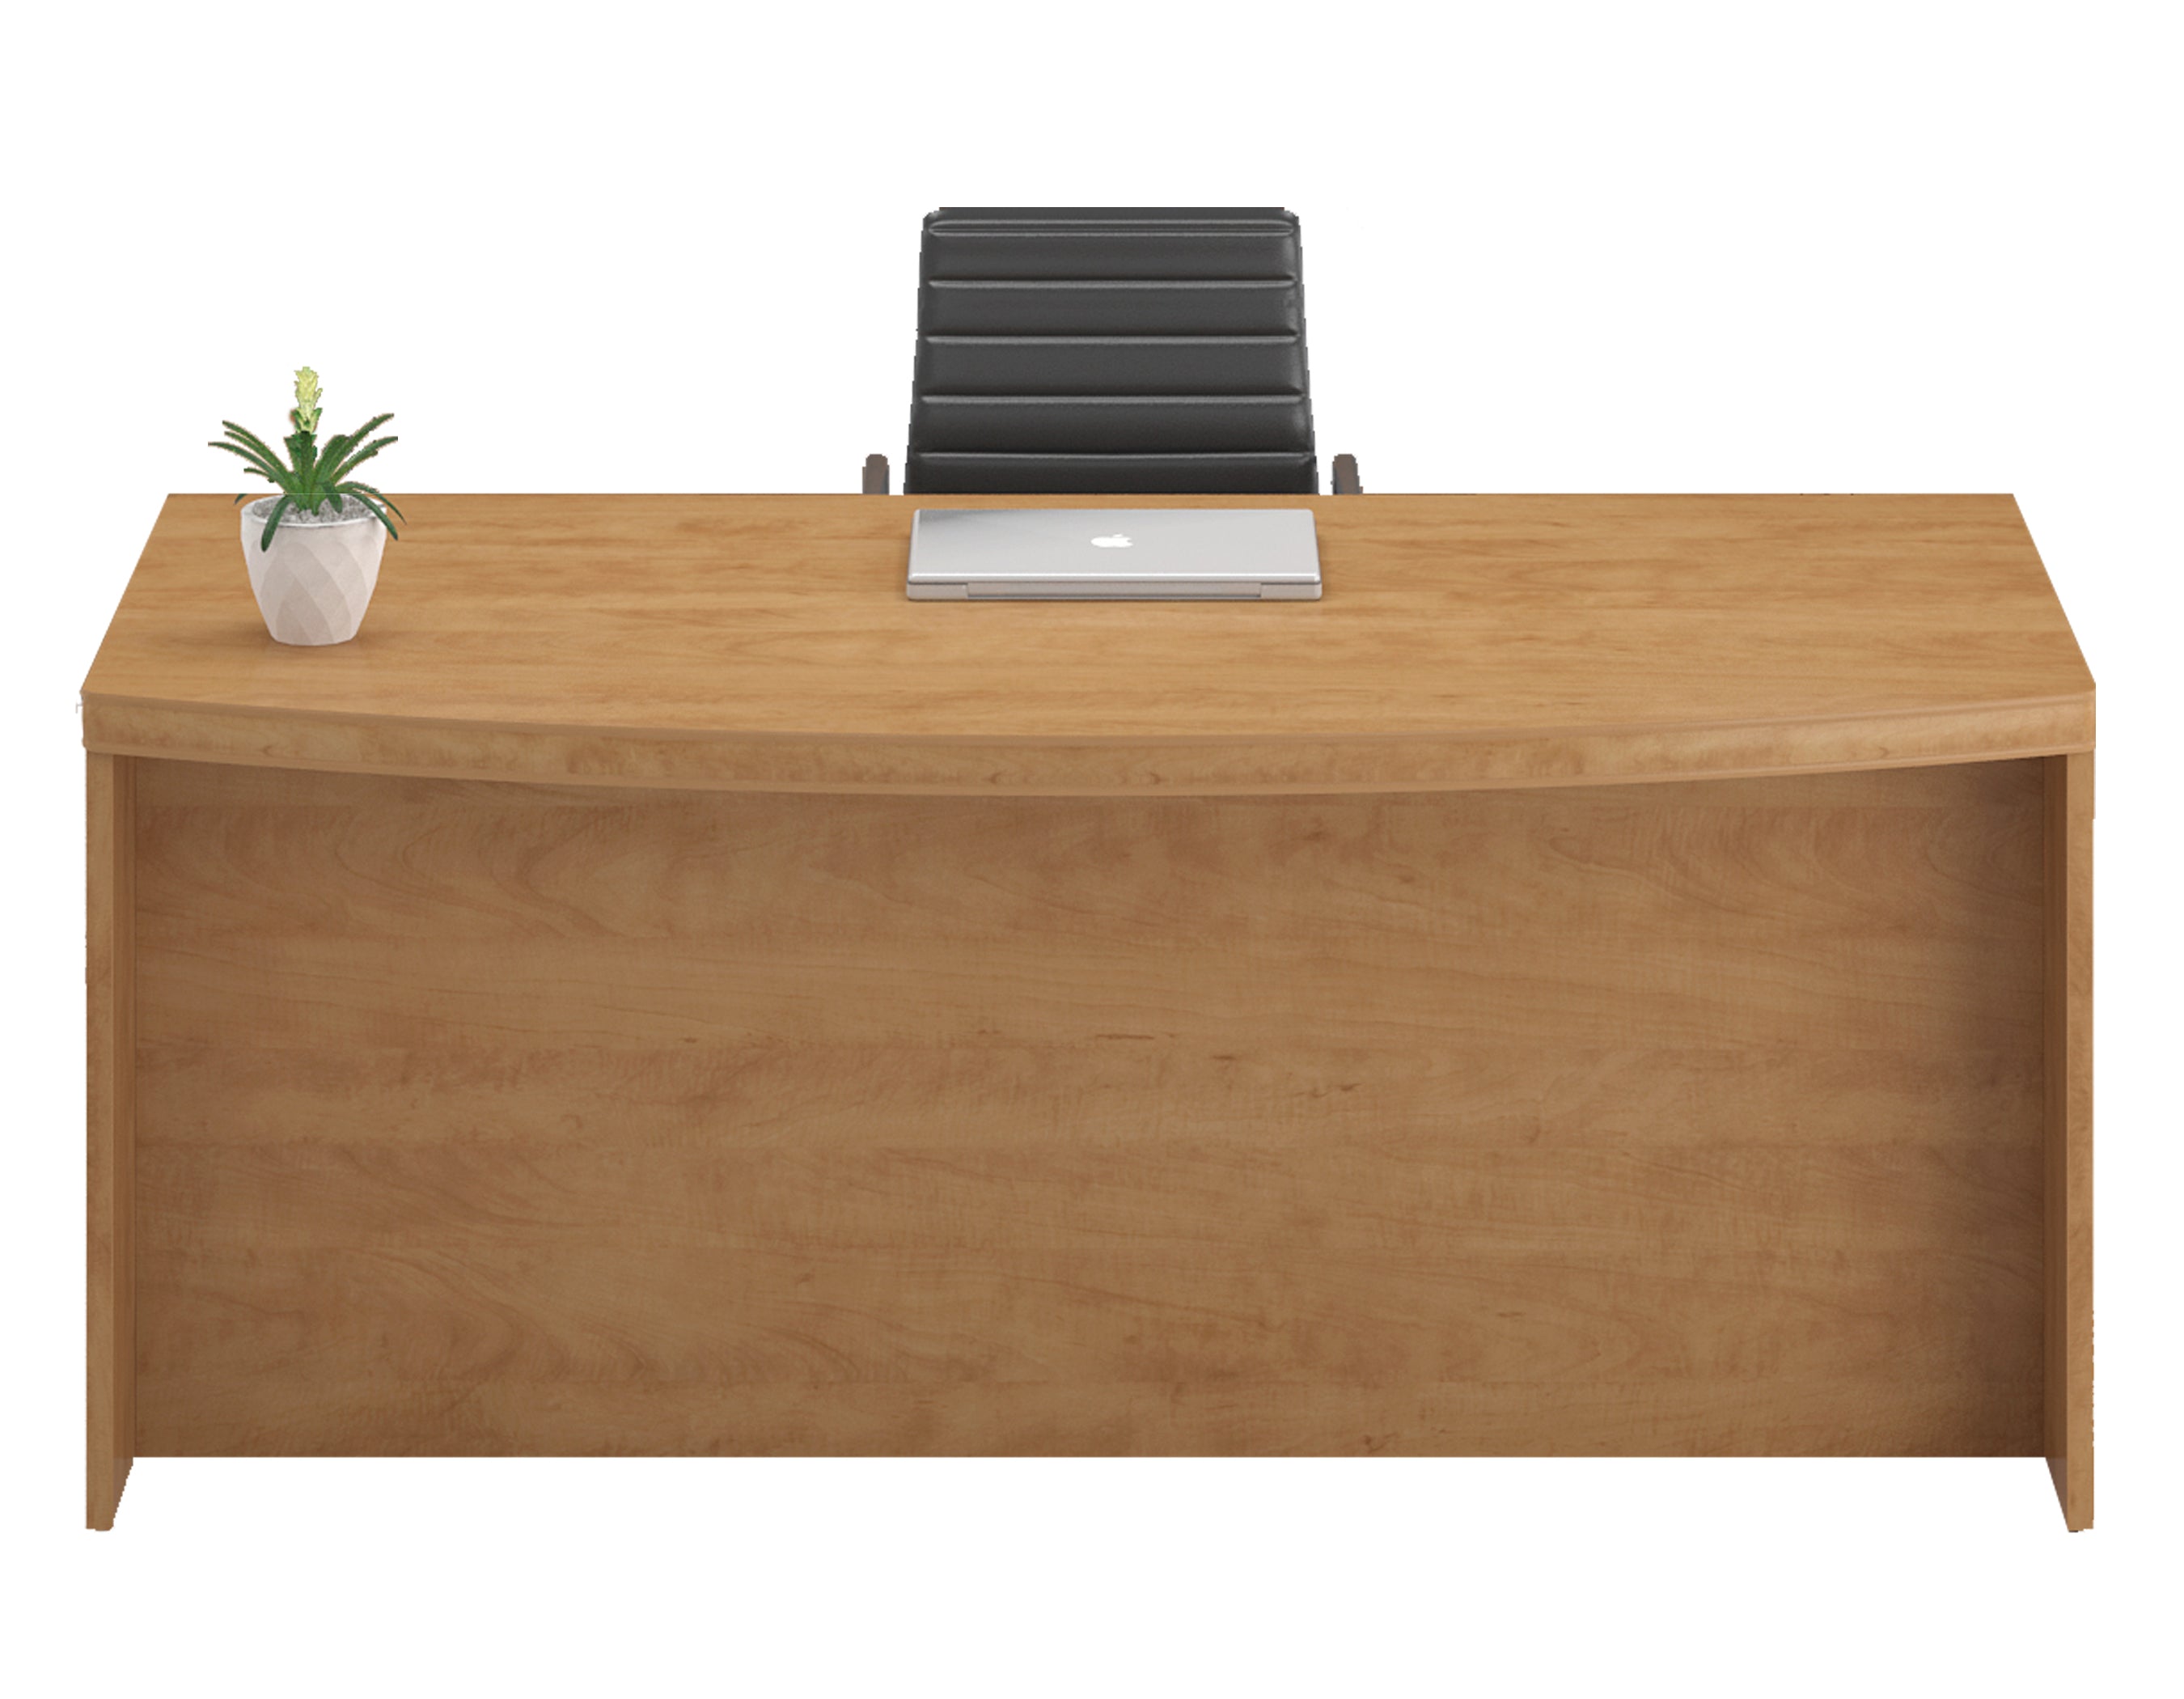 CA266BT - Deluxe Executive 2" Bow Top Double Pedestal Office Desk by Candex